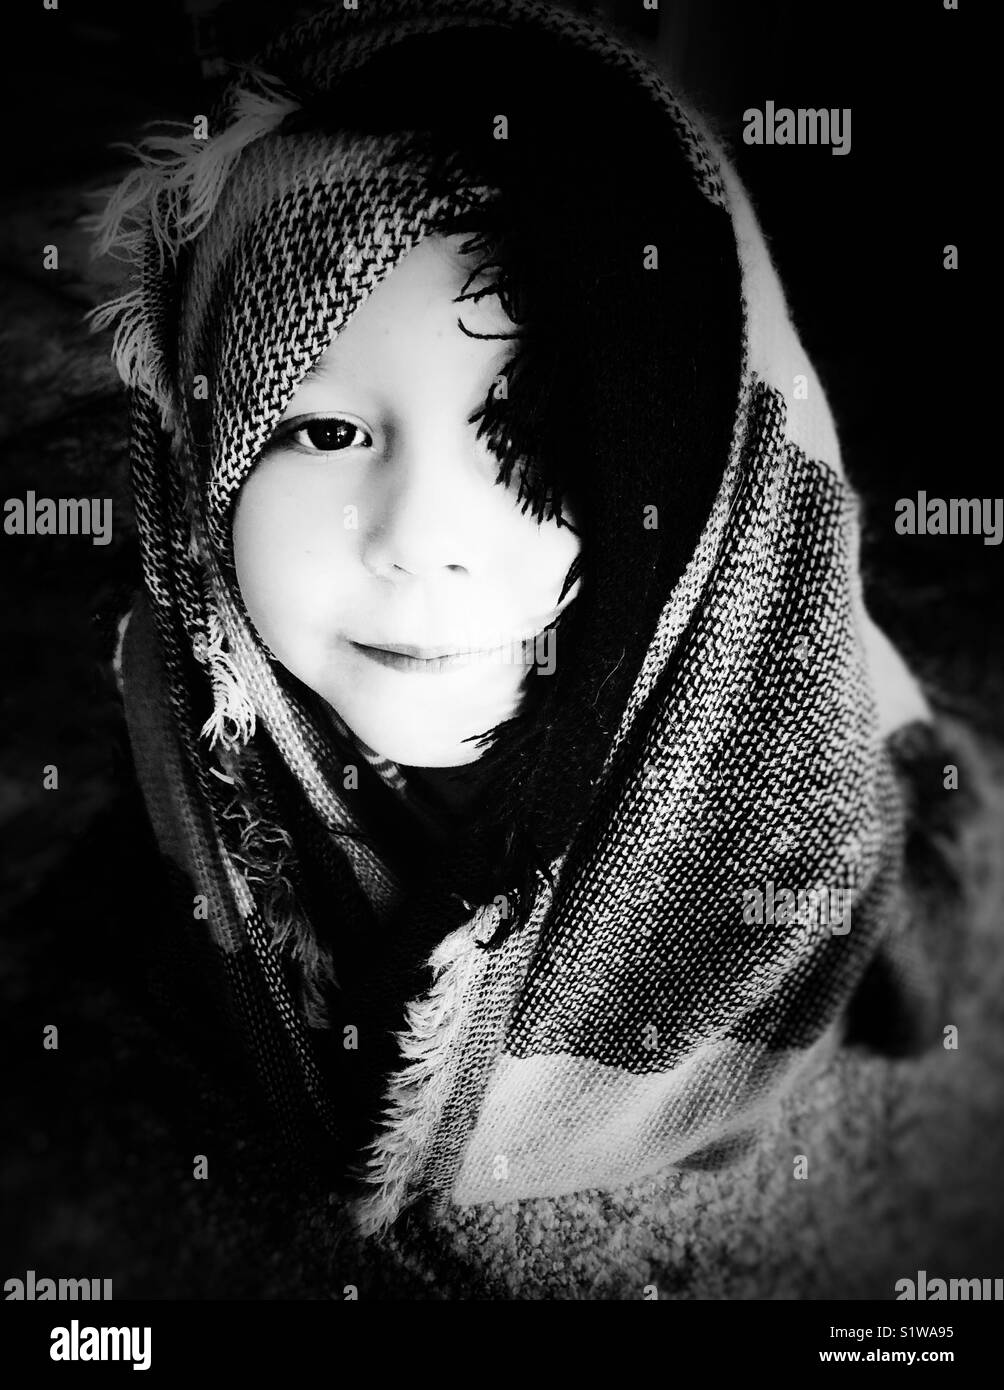 Portrait of a girl wrapped in blanket covering head and eye in black and white Stock Photo